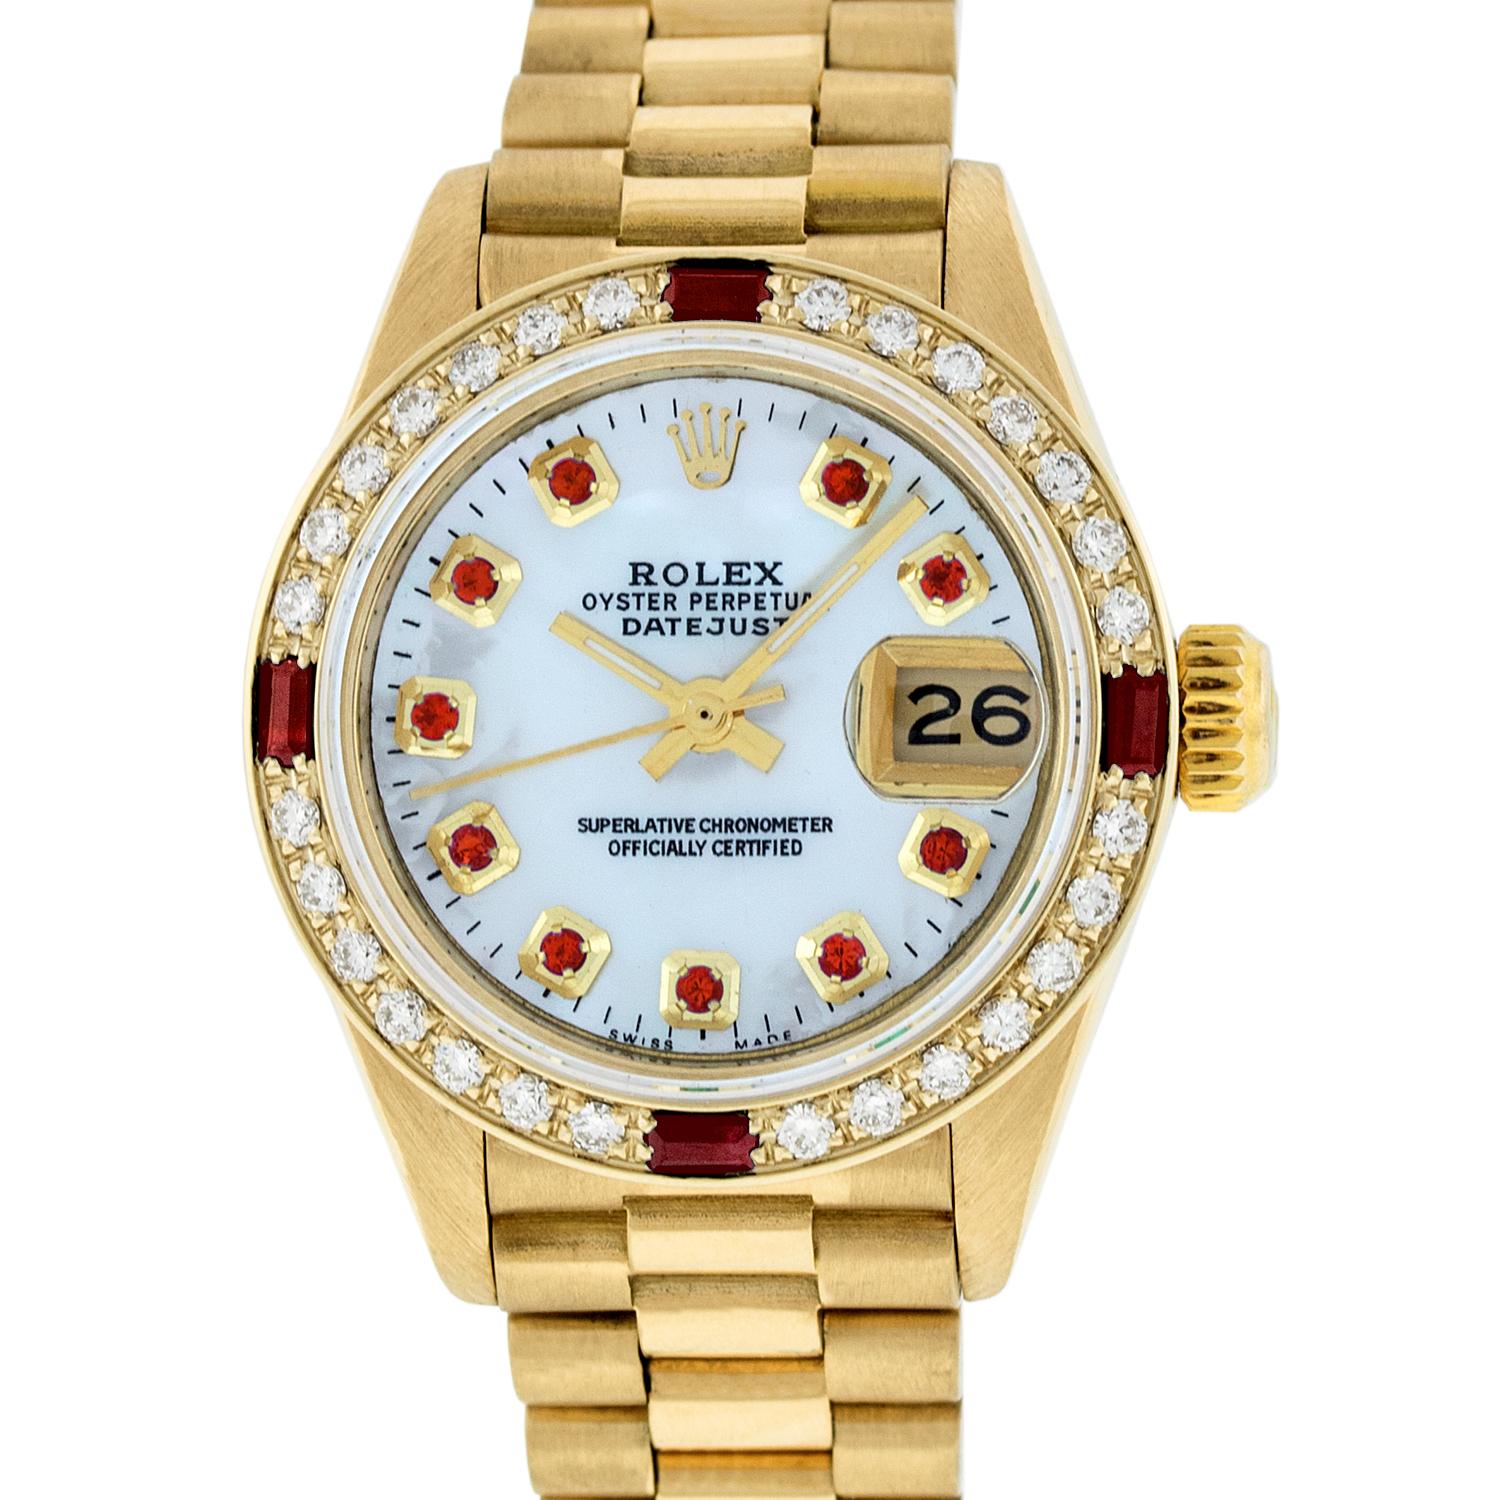 WATCH DESCRIPTION
 
BRAND : Rolex
MODEL : Datejust
CASE SIZE : 26mm
CASE : Rolex 18K Yellow Gold Case
GENDER : Women's

WATCH FEATURES
 
DIAL : Rolex Professionally Refinished Mother of Pearl Dial set with aftermarket Genuine Ruby Hour Markers
BEZEL